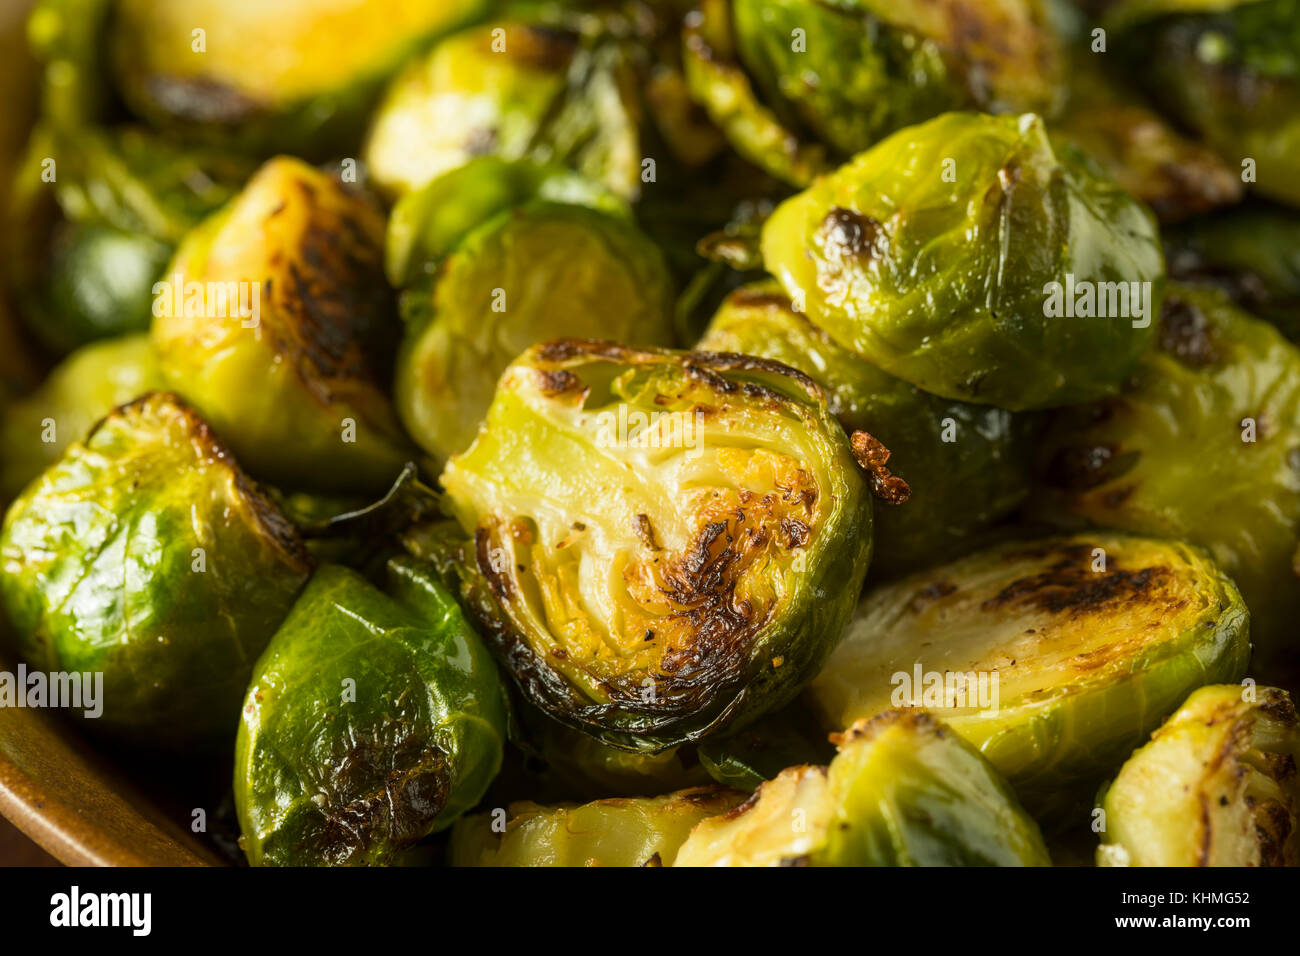 Homemade Roasted Green Brussel Sprouts in a Bowl Stock Photo